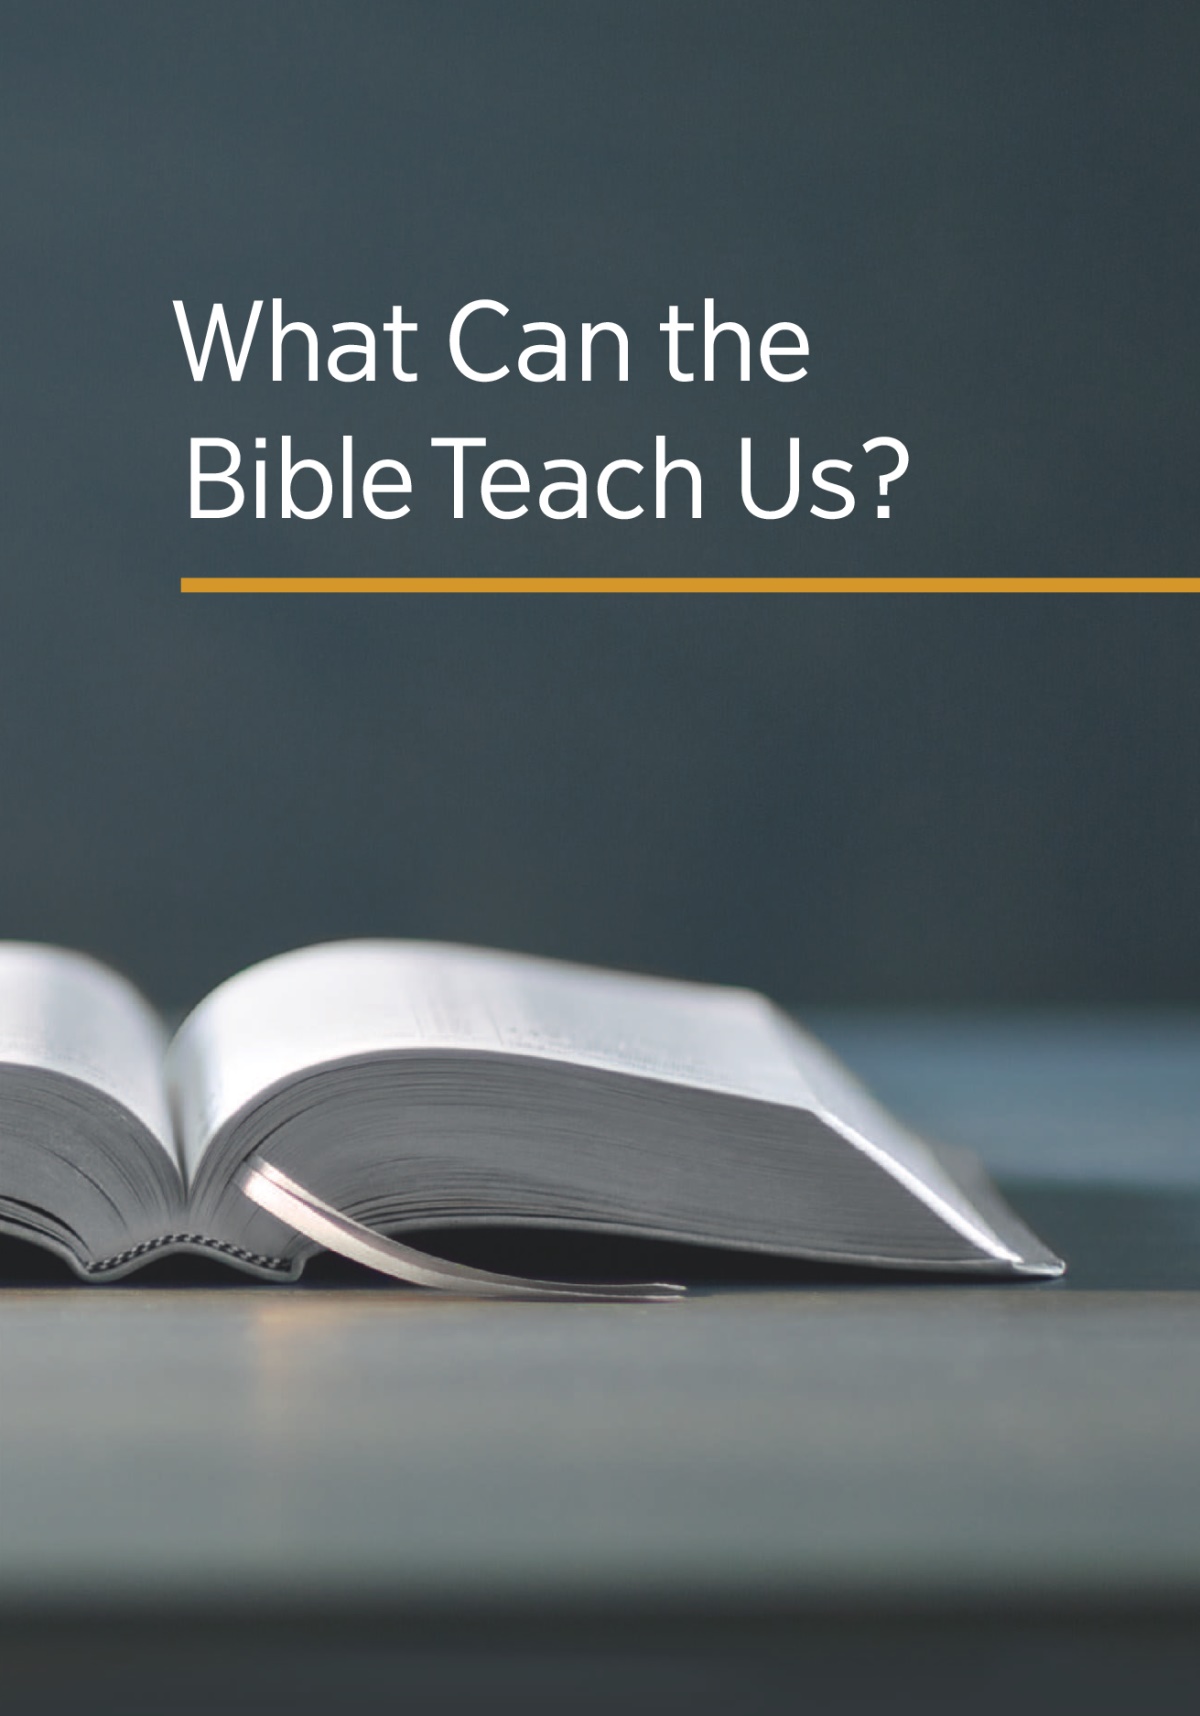 The book ‘What Can the Bible Teach Us?’